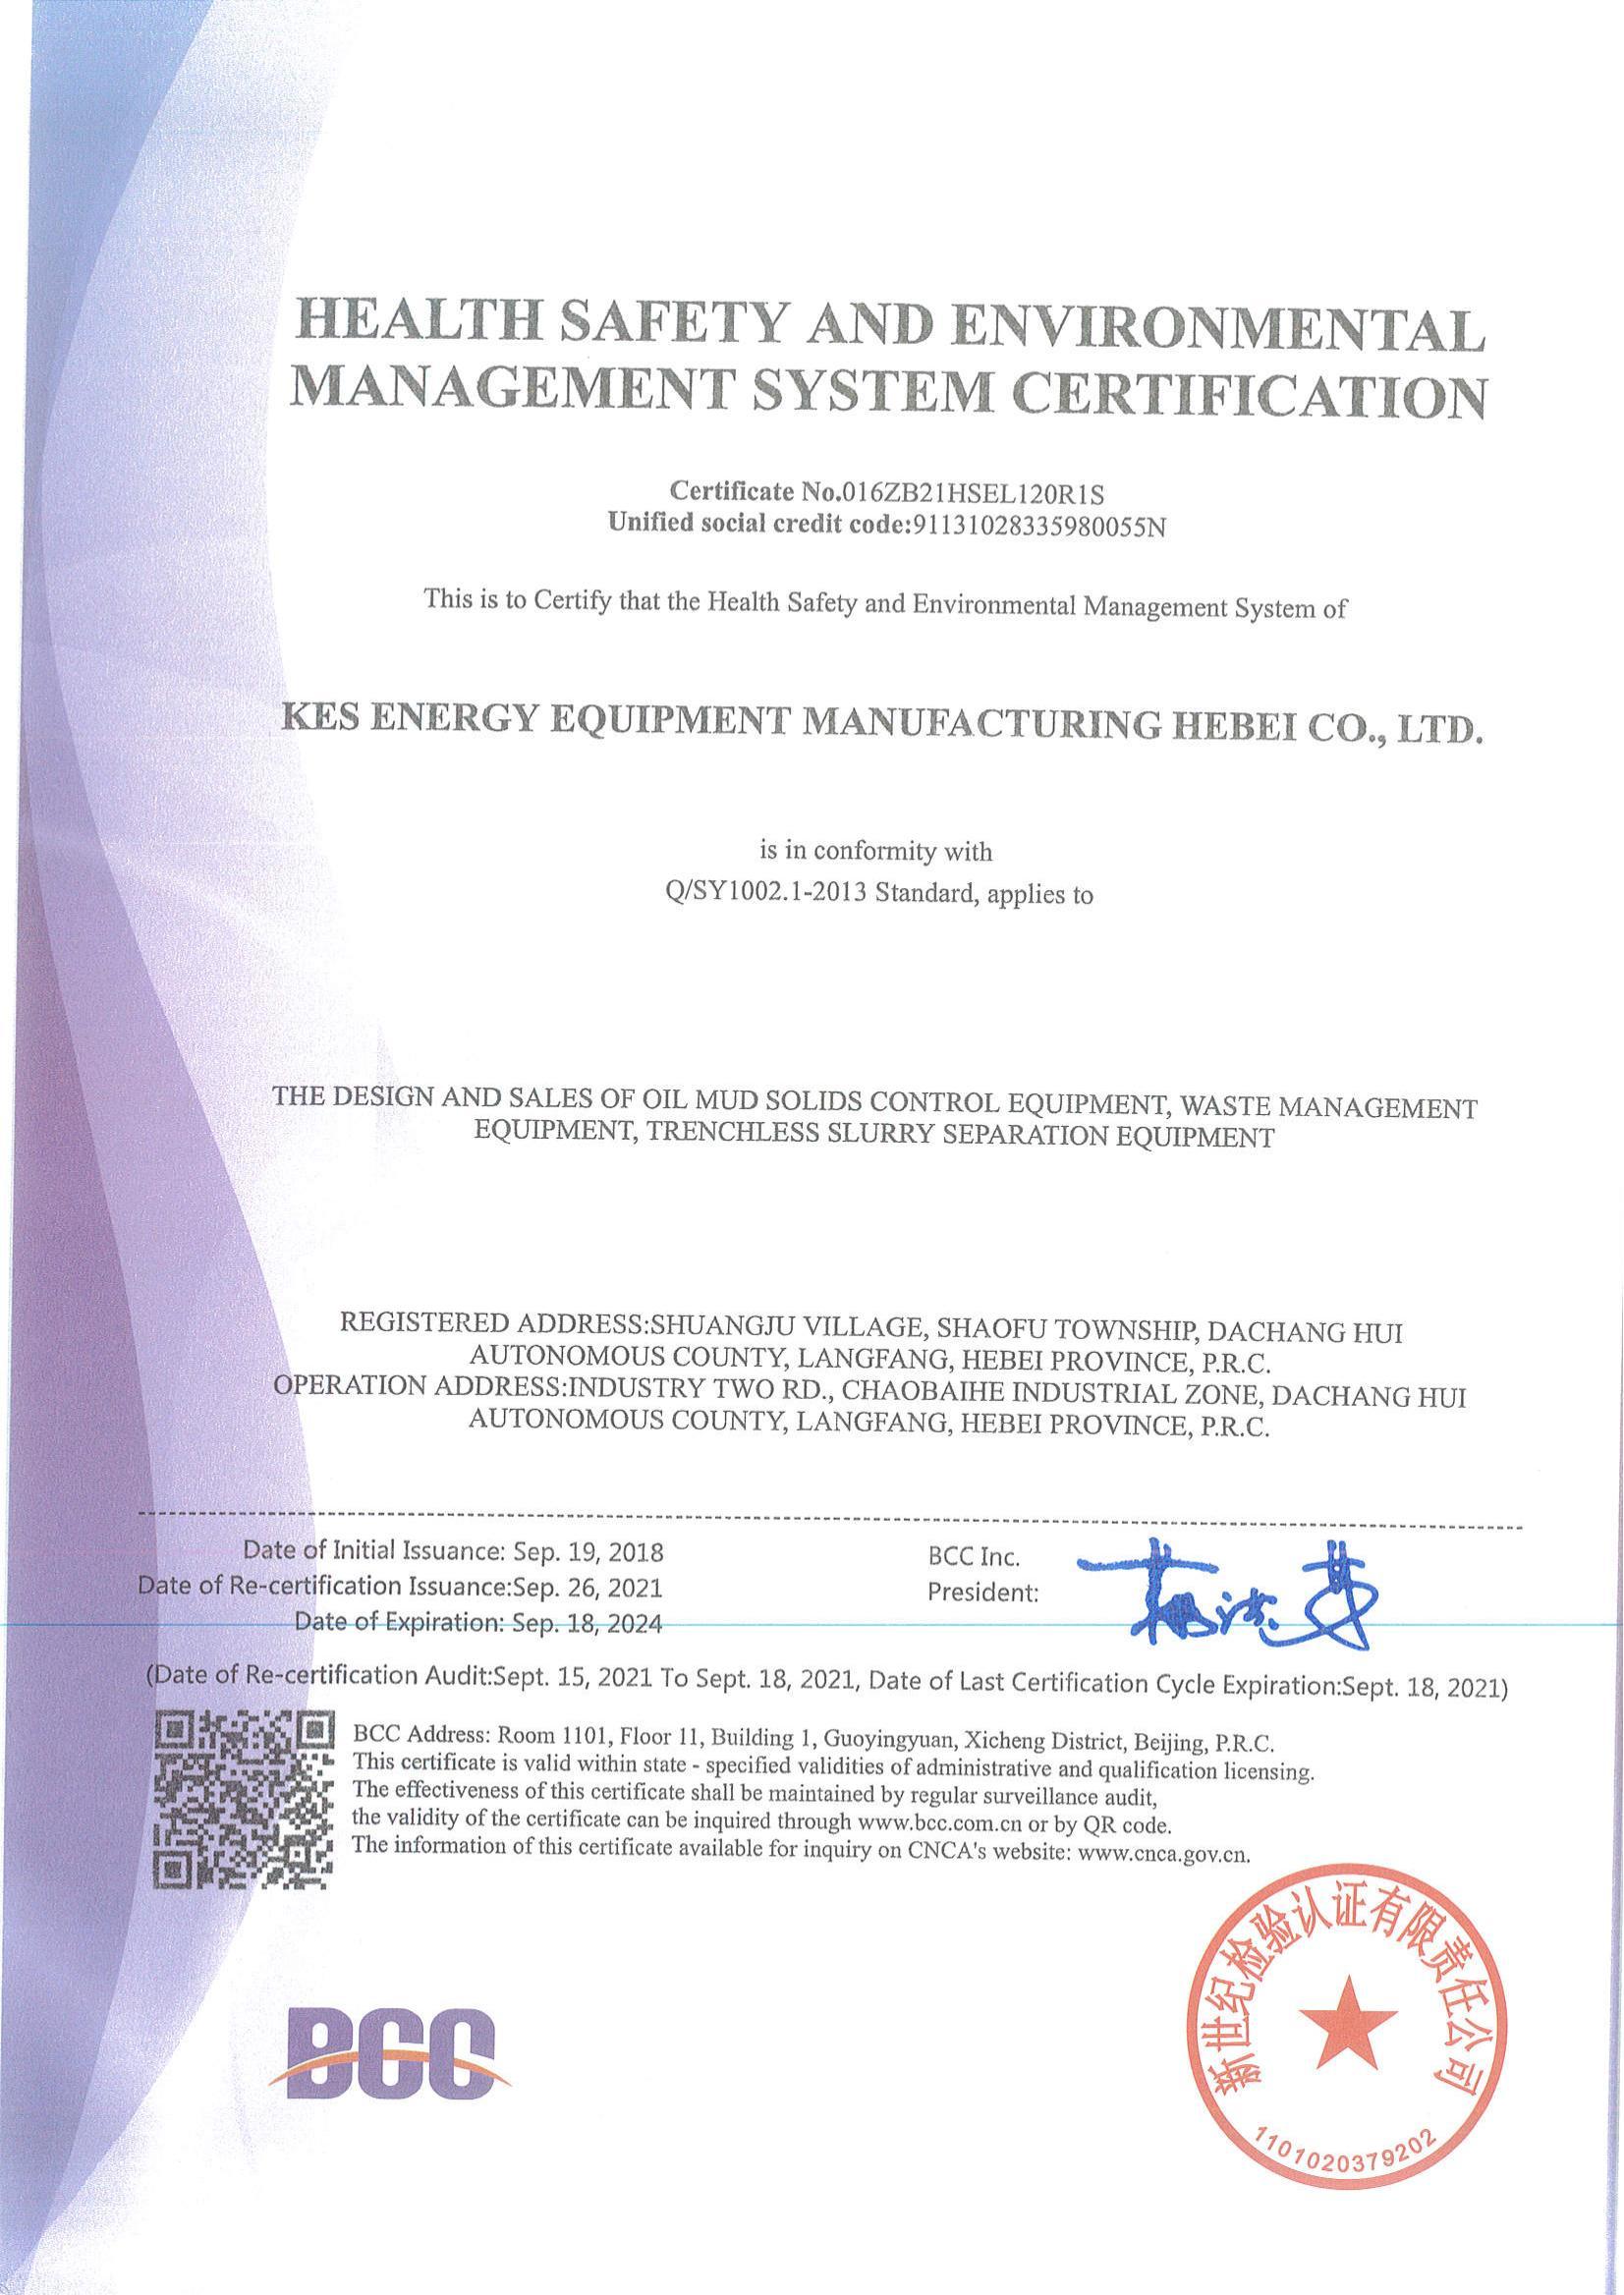 Health, Safety and Environmental Management System Certification-English